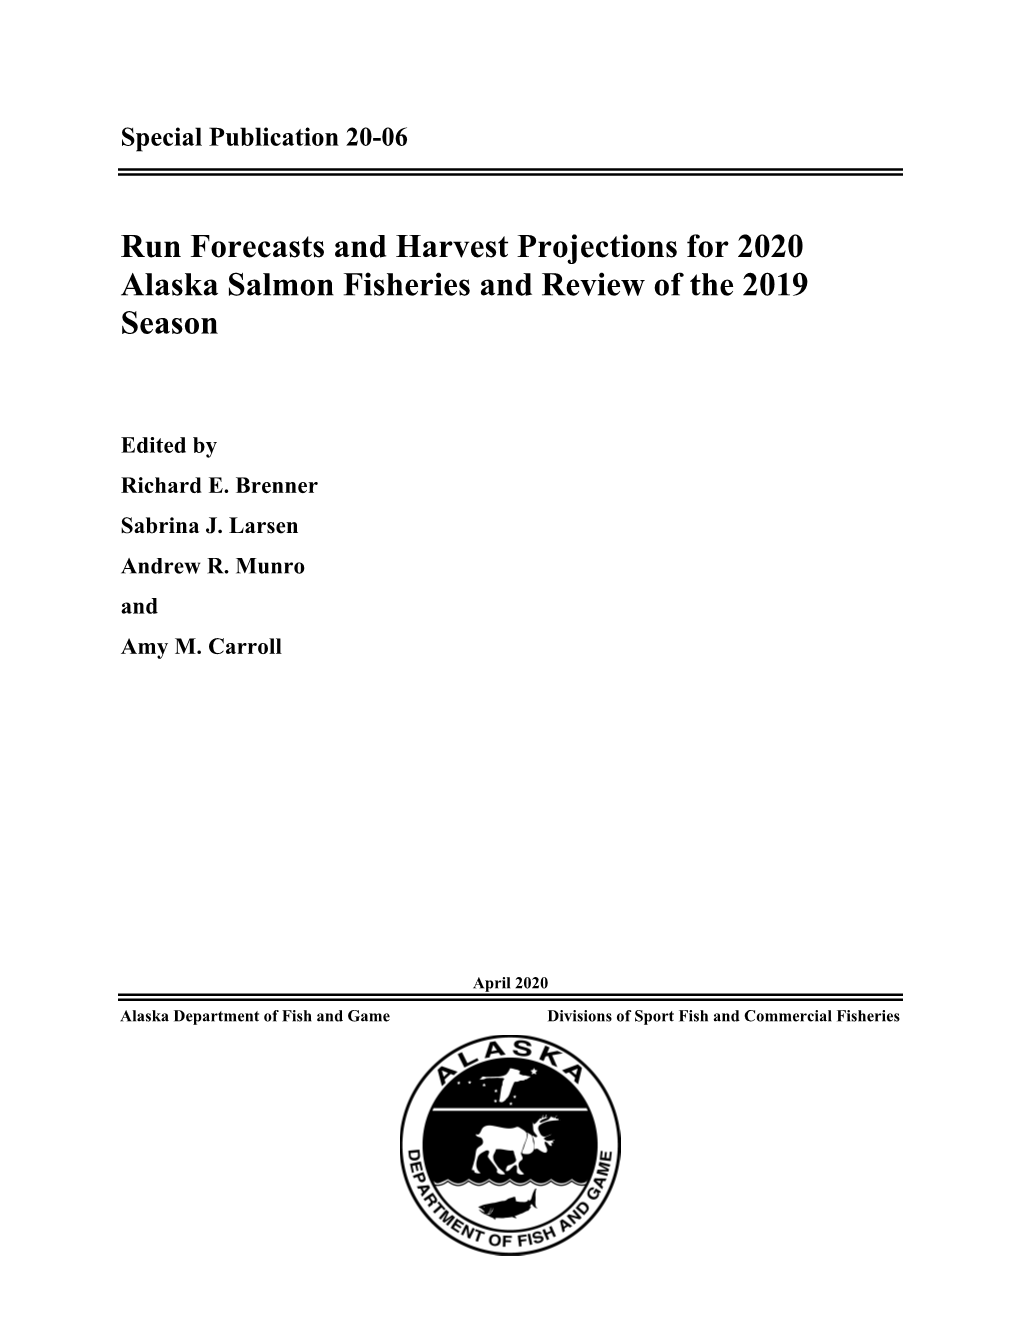 Run Forecasts and Harvest Projections for 2020 Alaska Salmon Fisheries and Review of the 2019 Season. Alaska Department of Fish and Game, Special Publication No